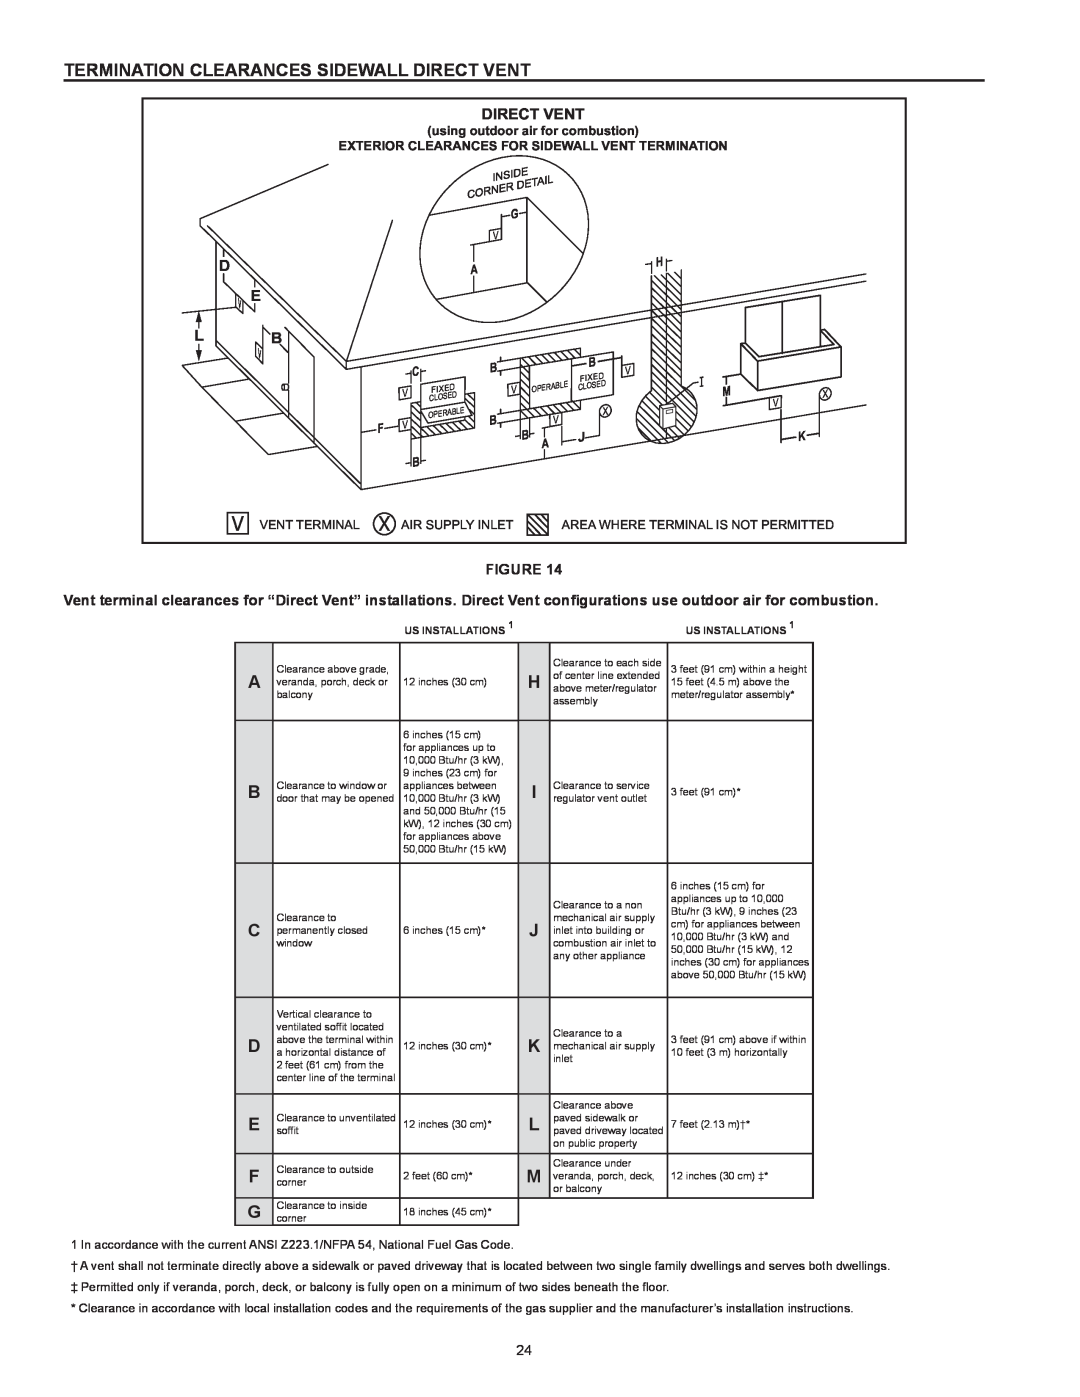 American Water Heater VG6250T100 instruction manual Termination Clearances Sidewall Direct Vent 